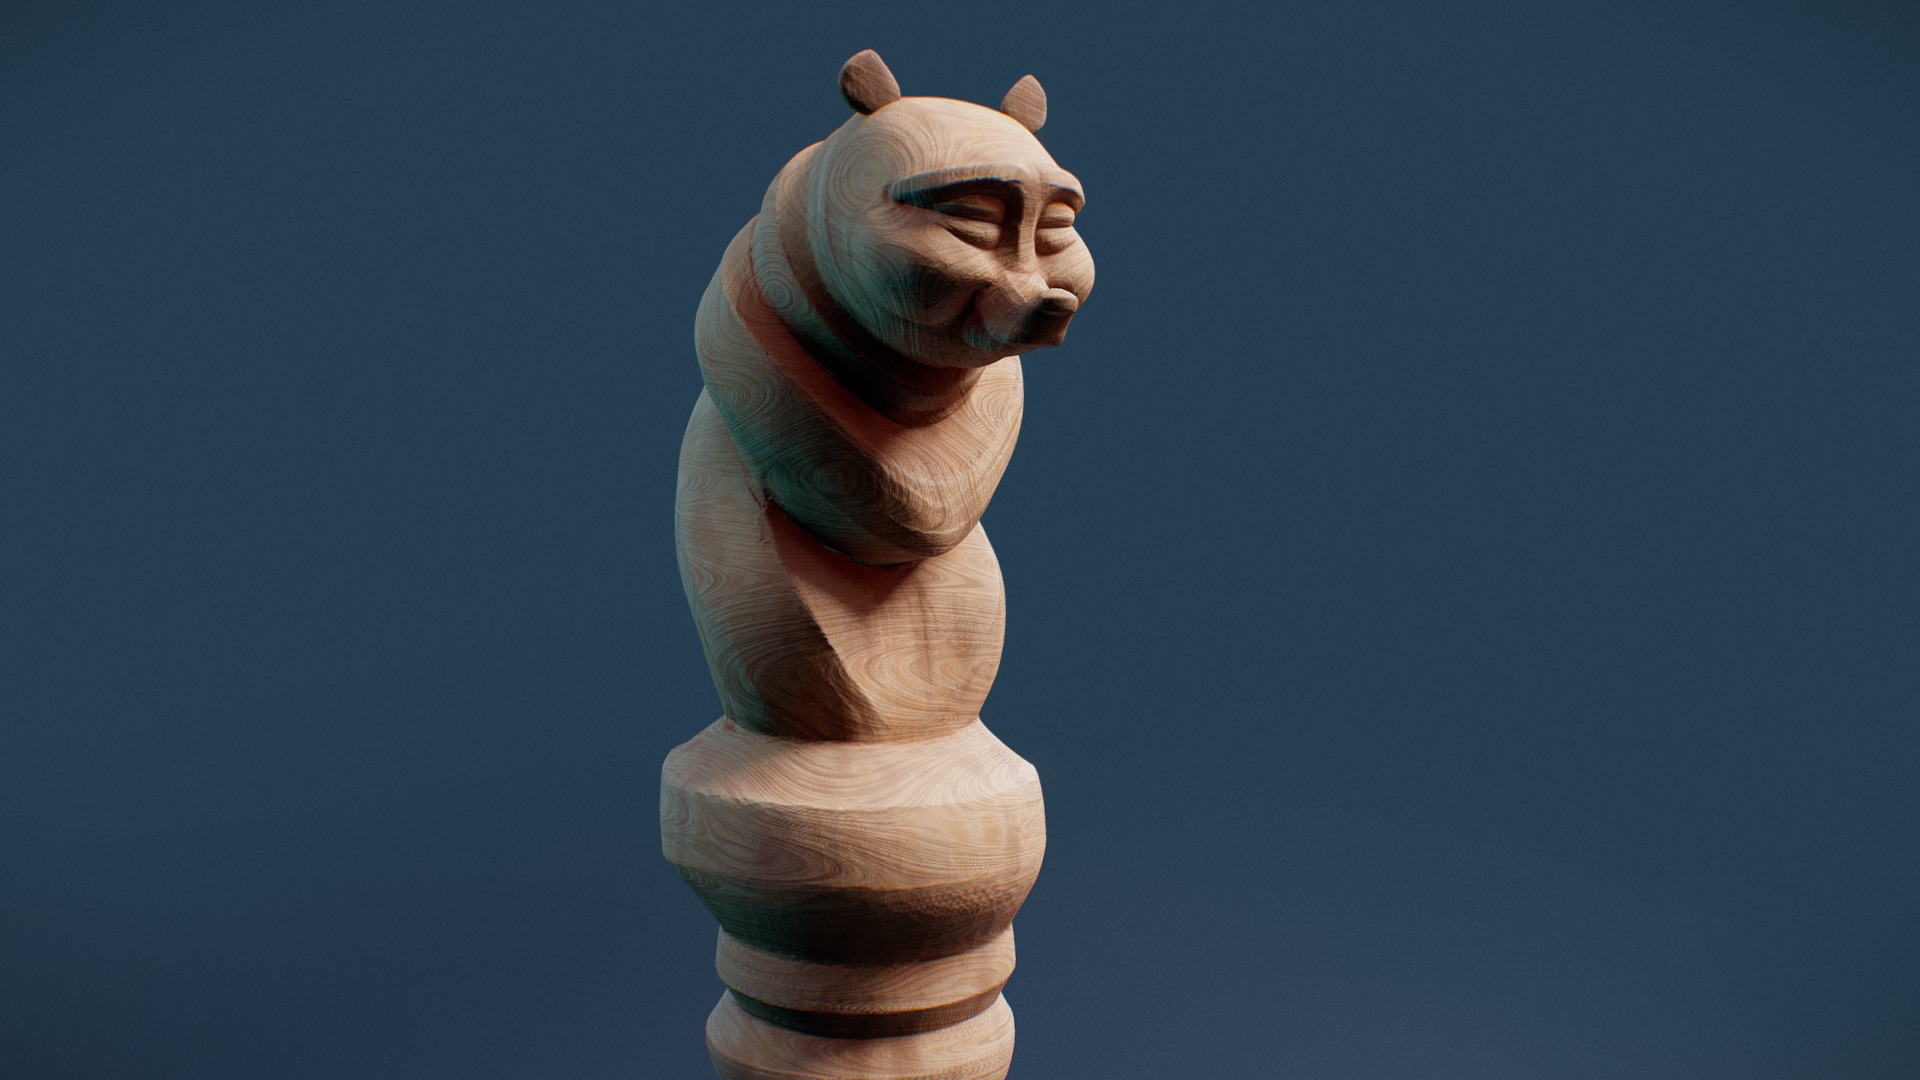 3D model Day 12 – Object : Staff - This is a 3D model of the Day 12 - Object : Staff. The 3D model is about a statue of a cat.